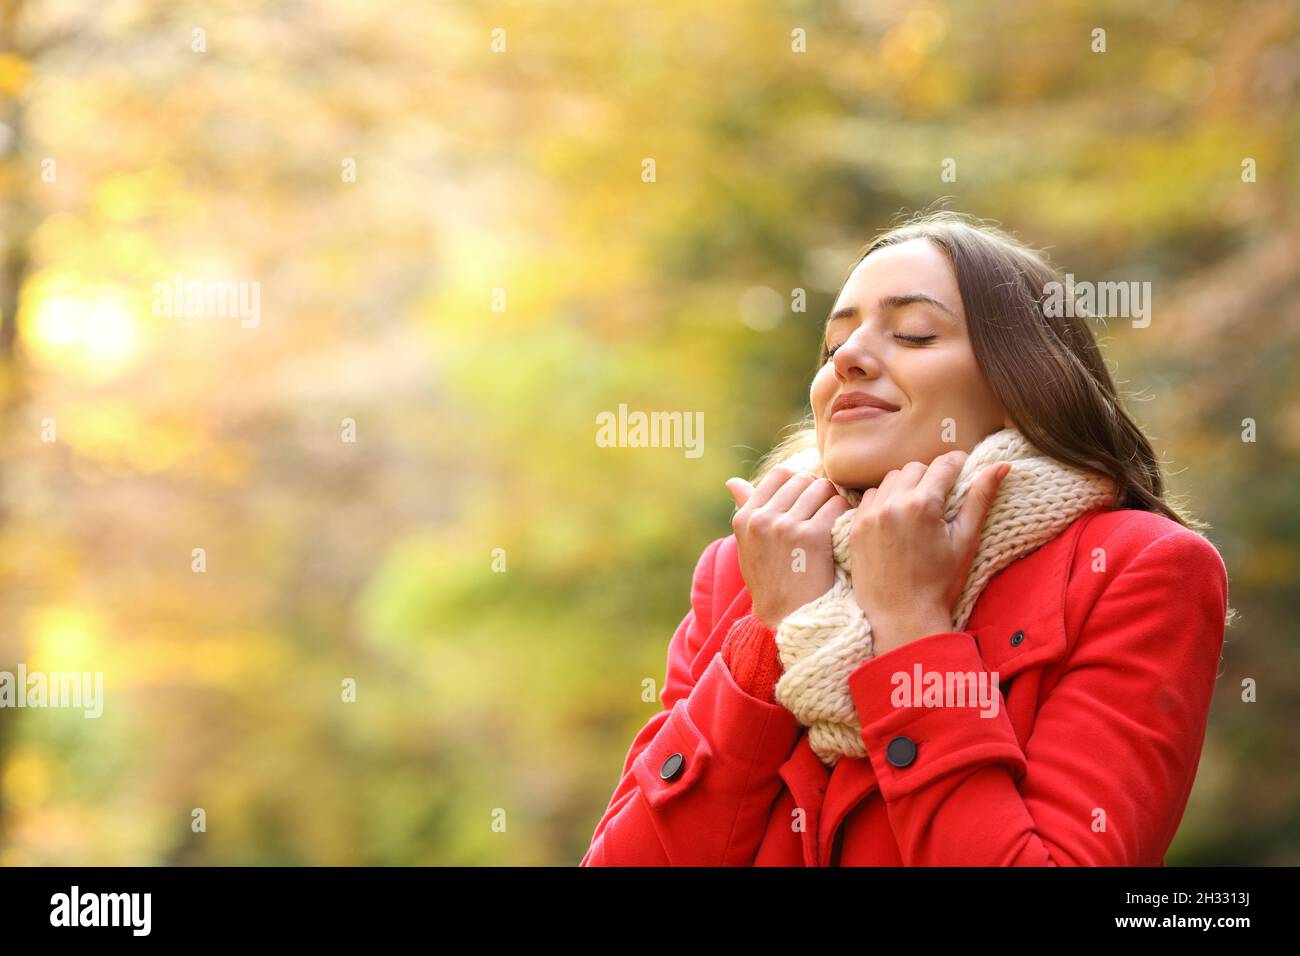 Happy woman in red warmly clothed in autumn in a park Stock Photo